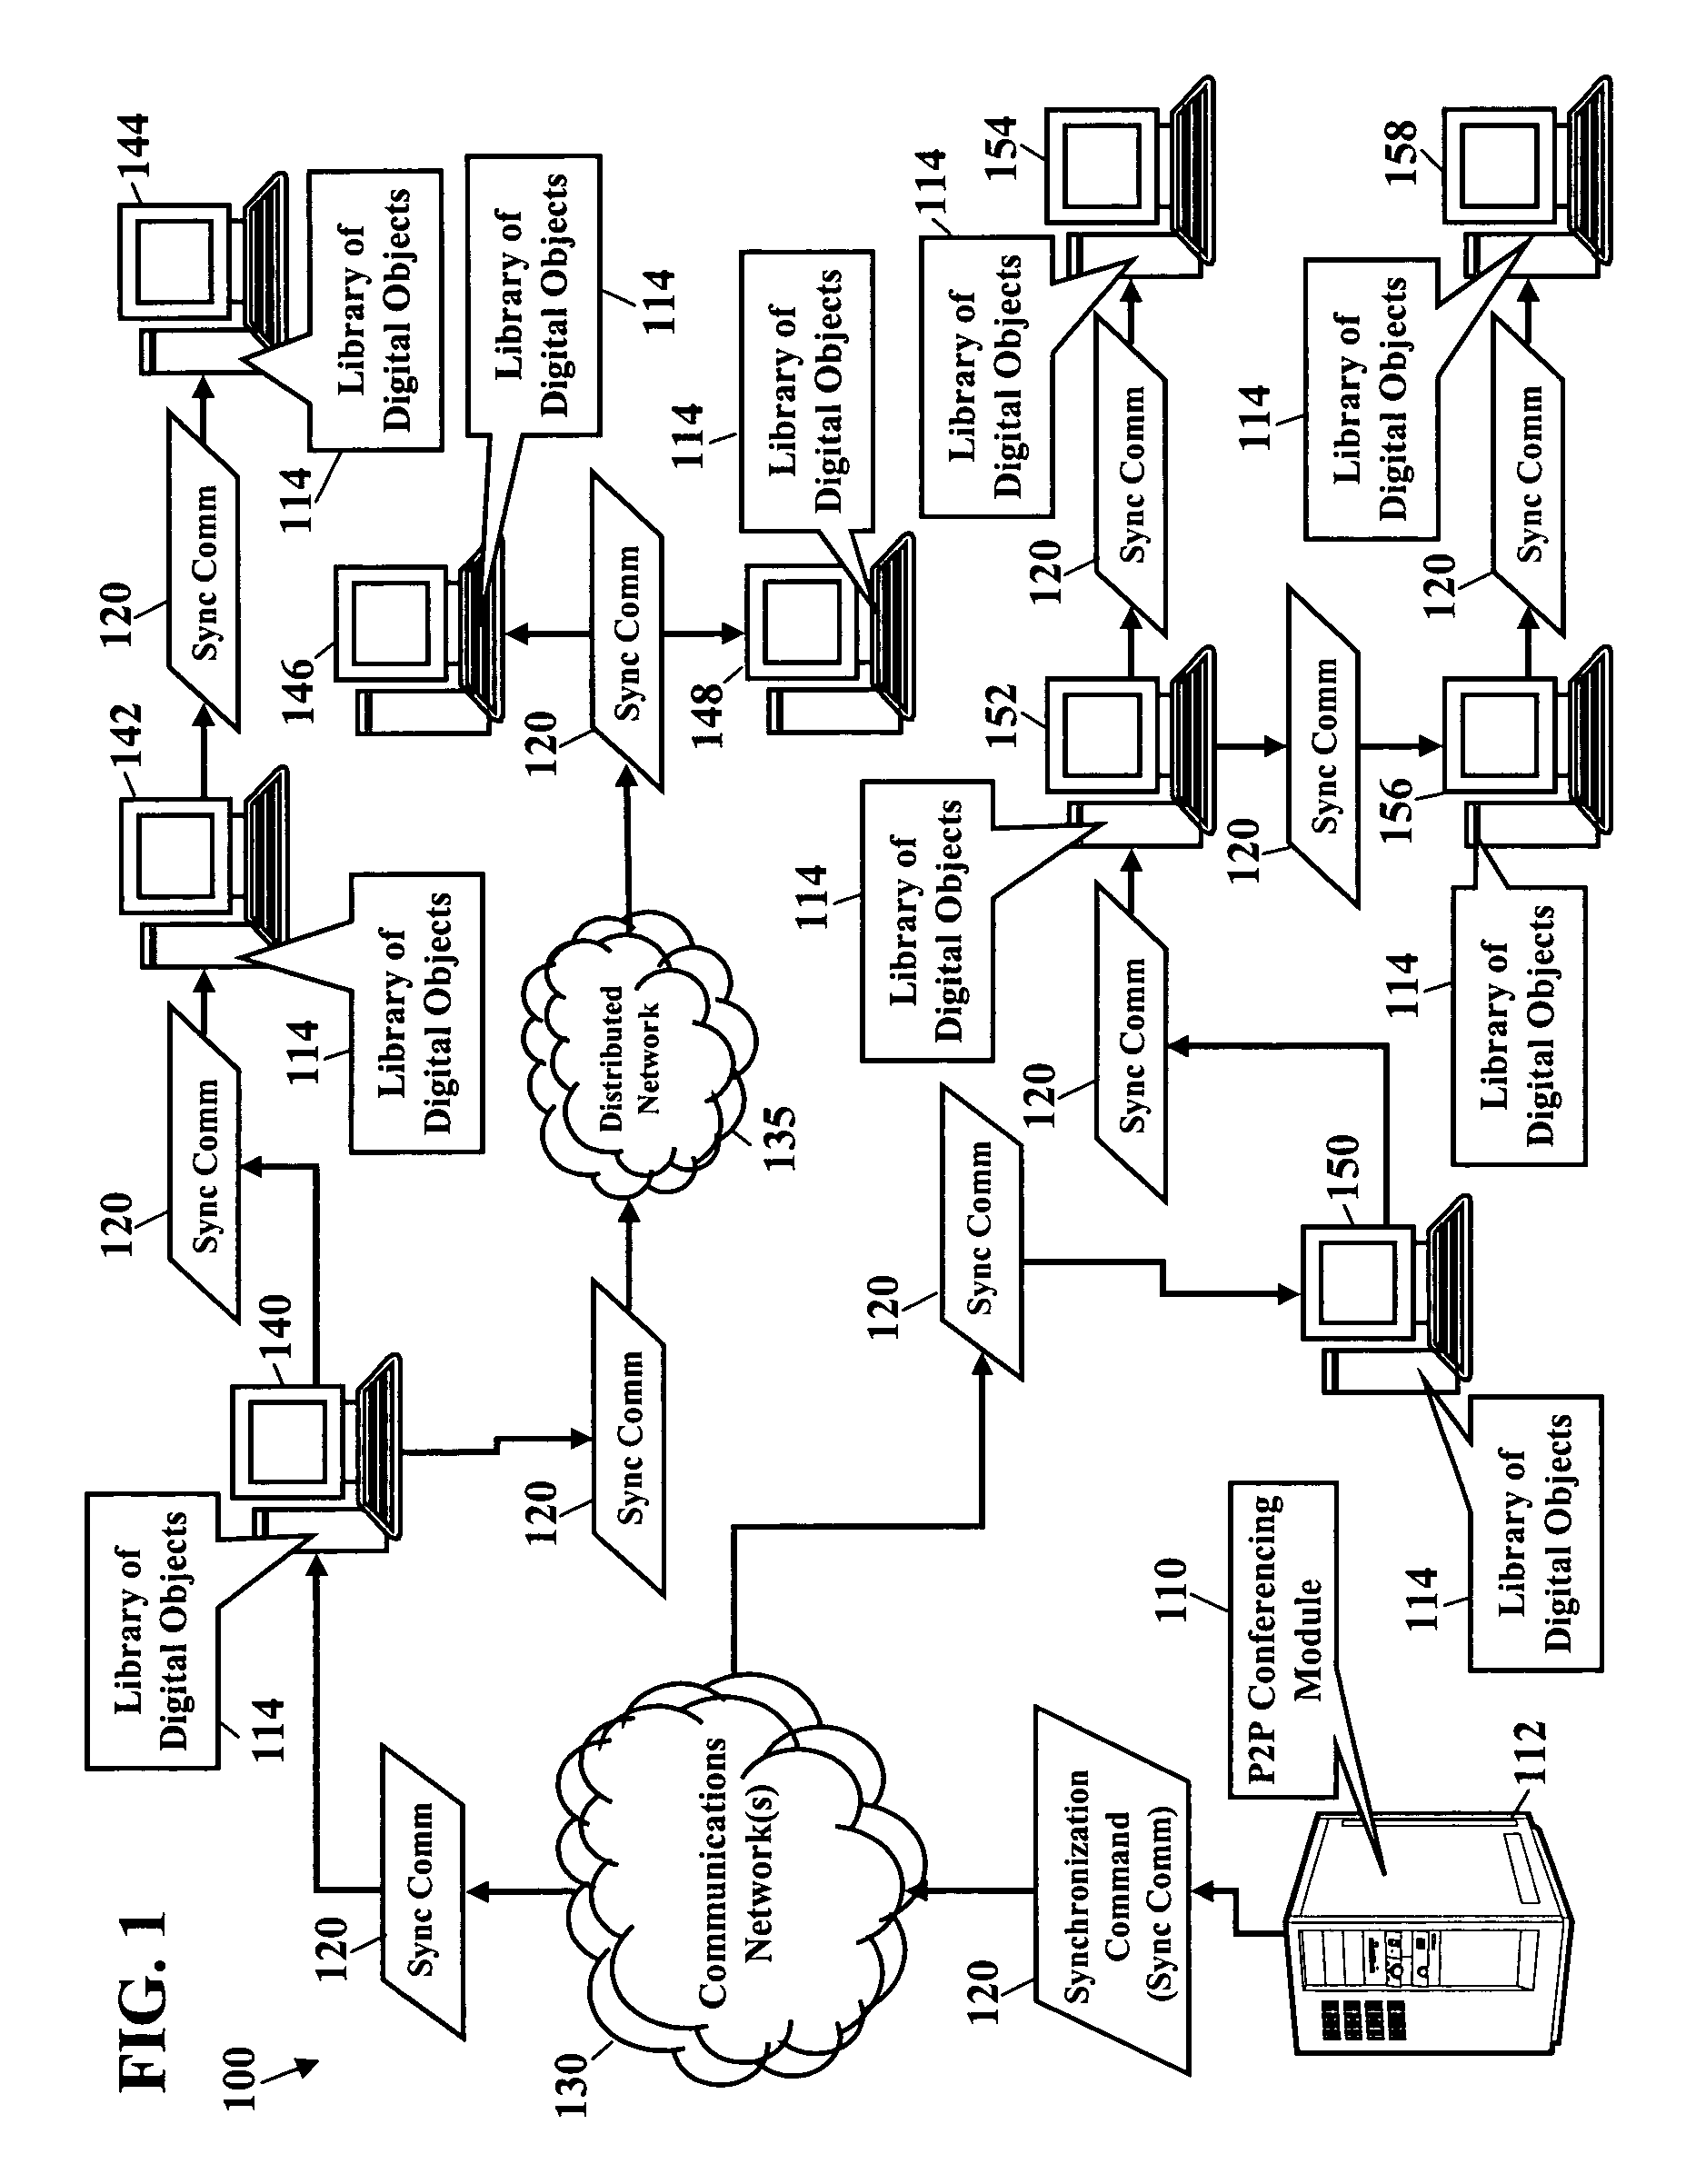 Network conferencing using method for distributed computing and/or distributed objects